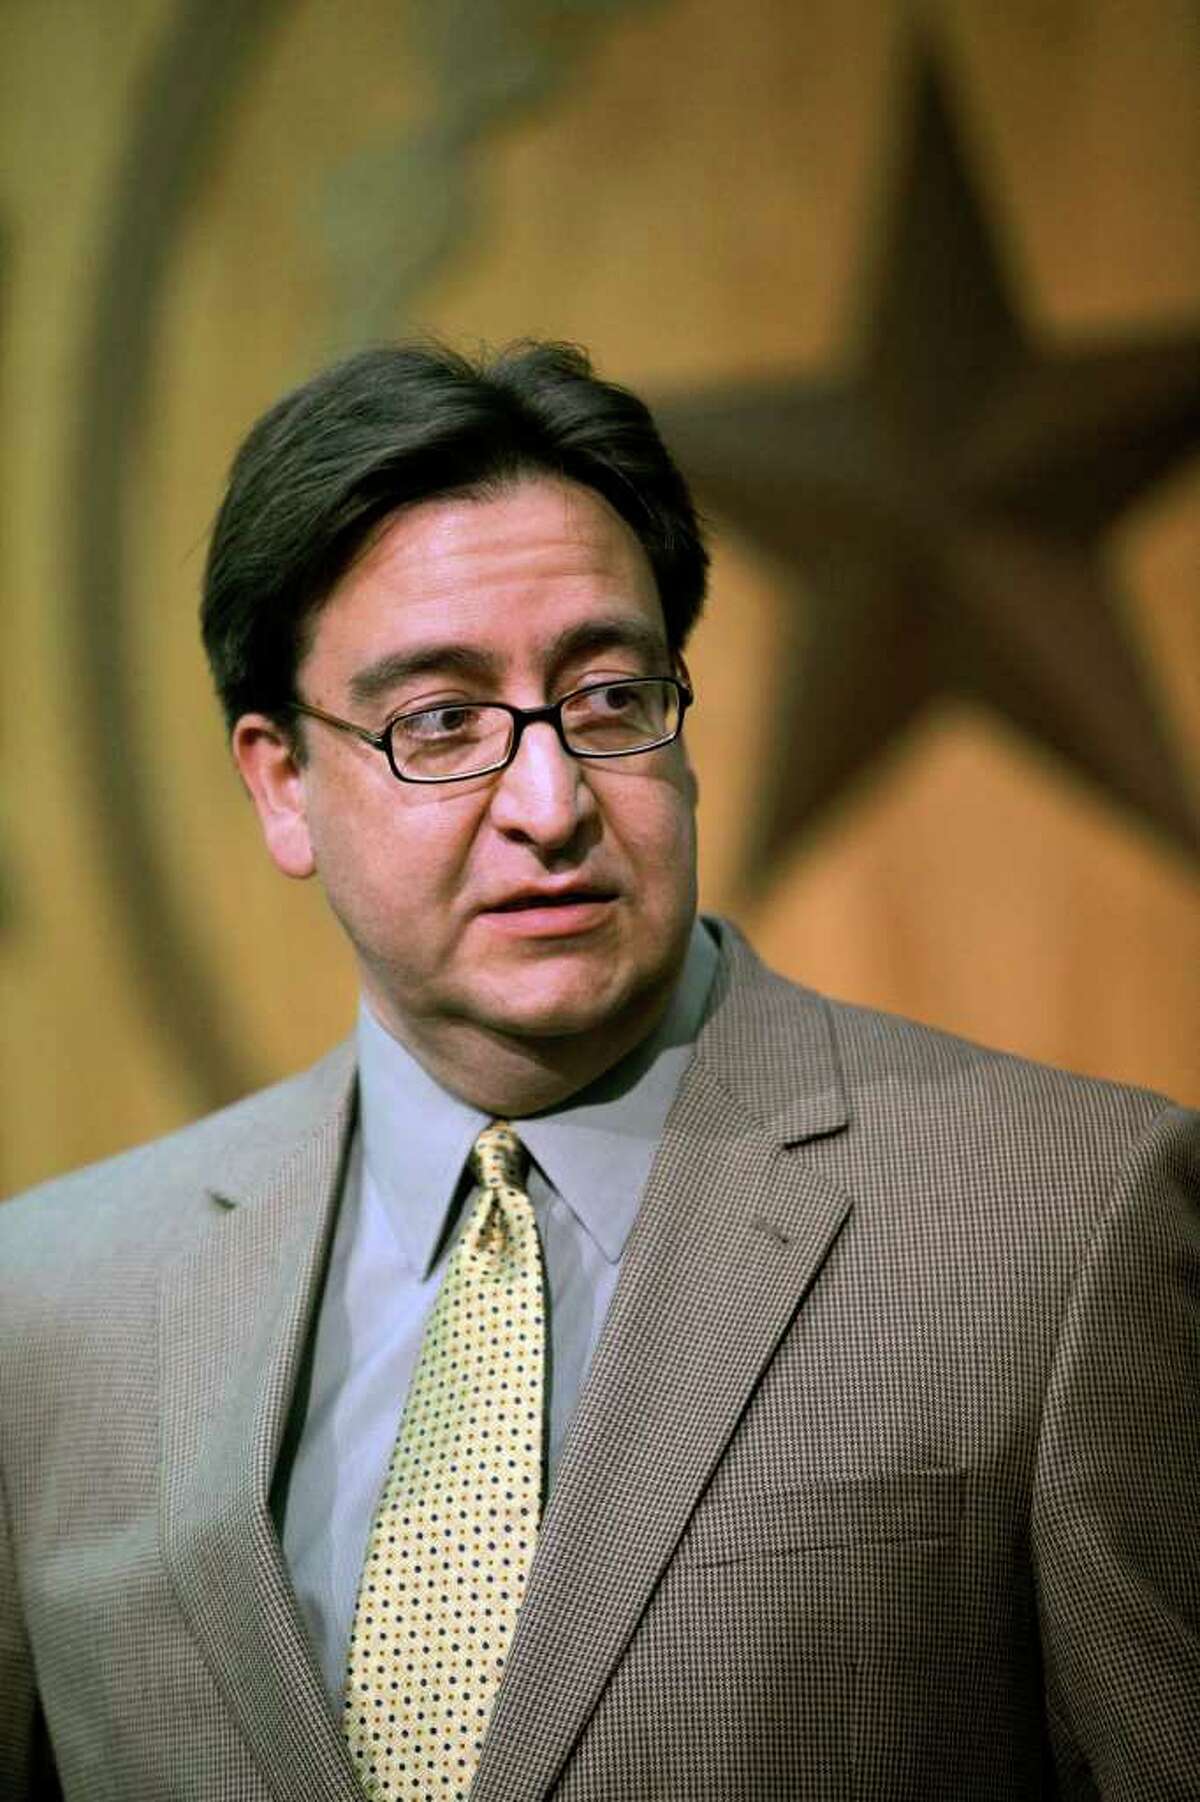 State Rep. Pete Gallego